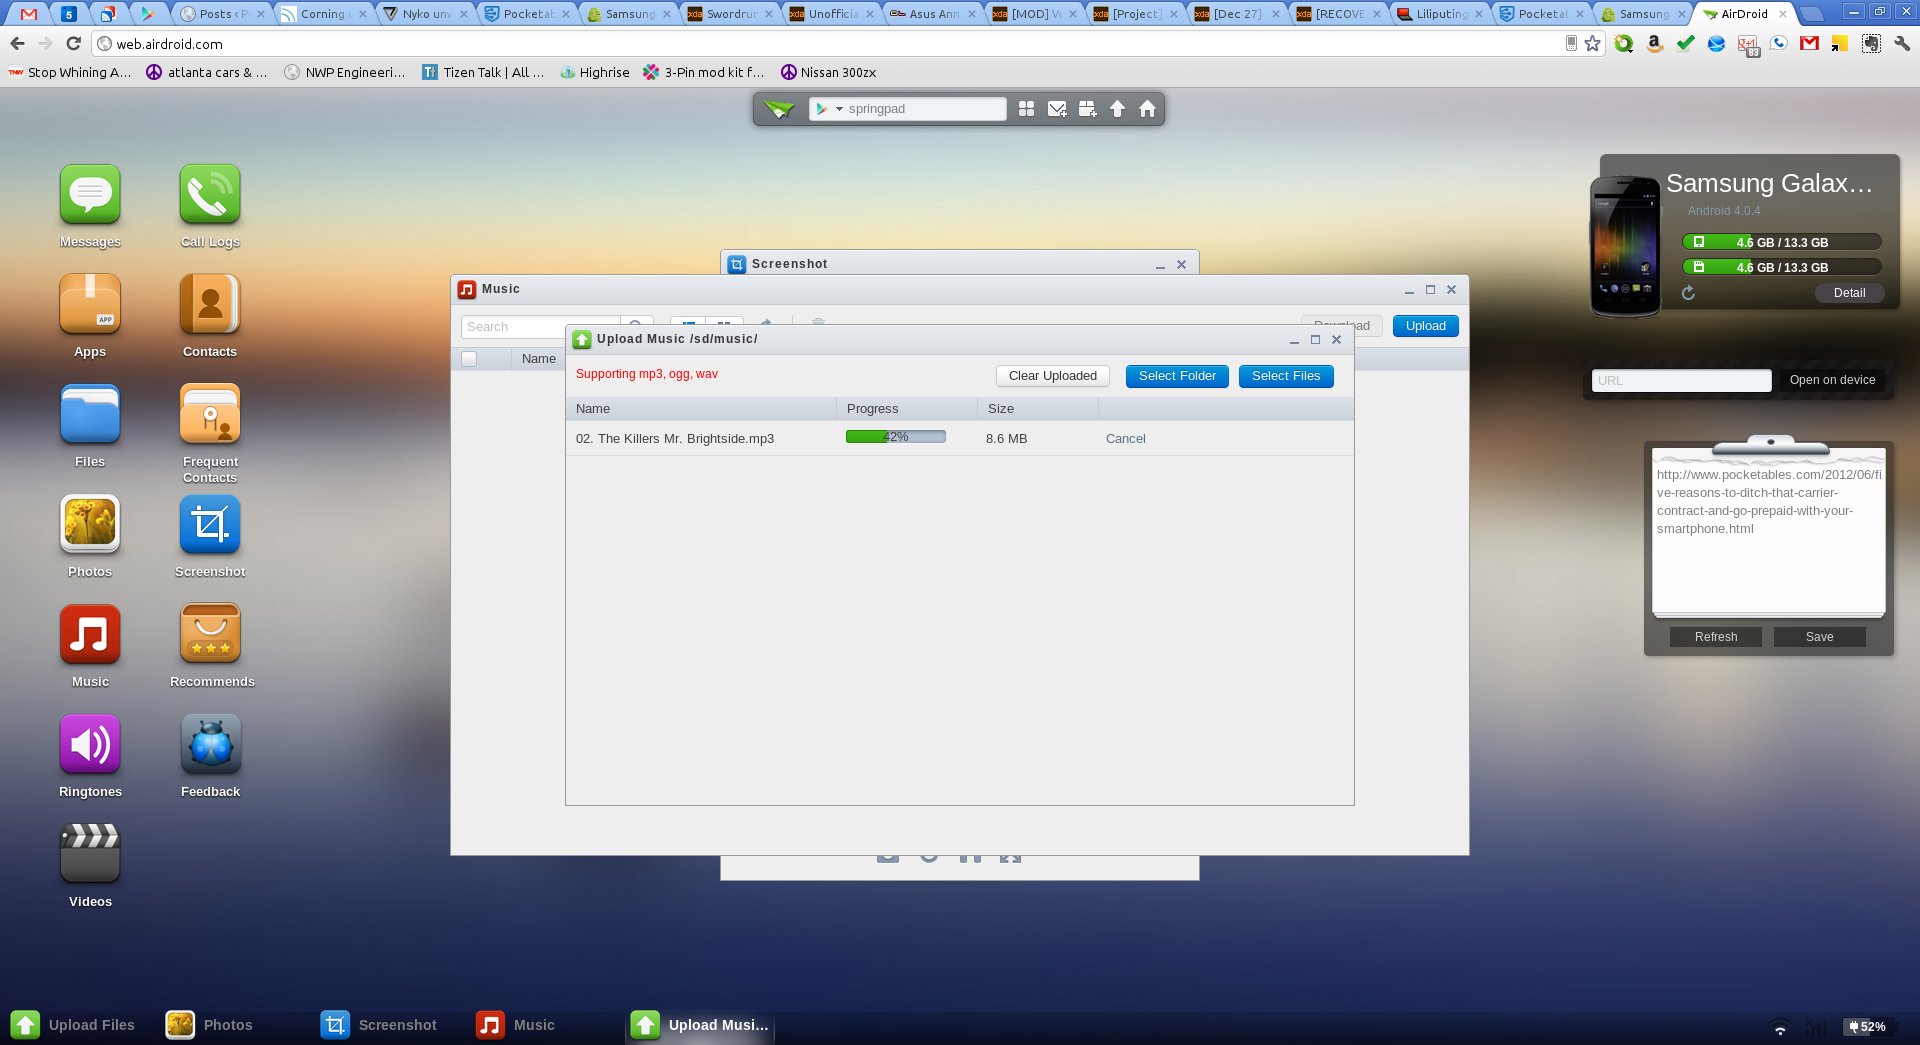 airdroid pc12 - for some reason we don't have an alt tag here